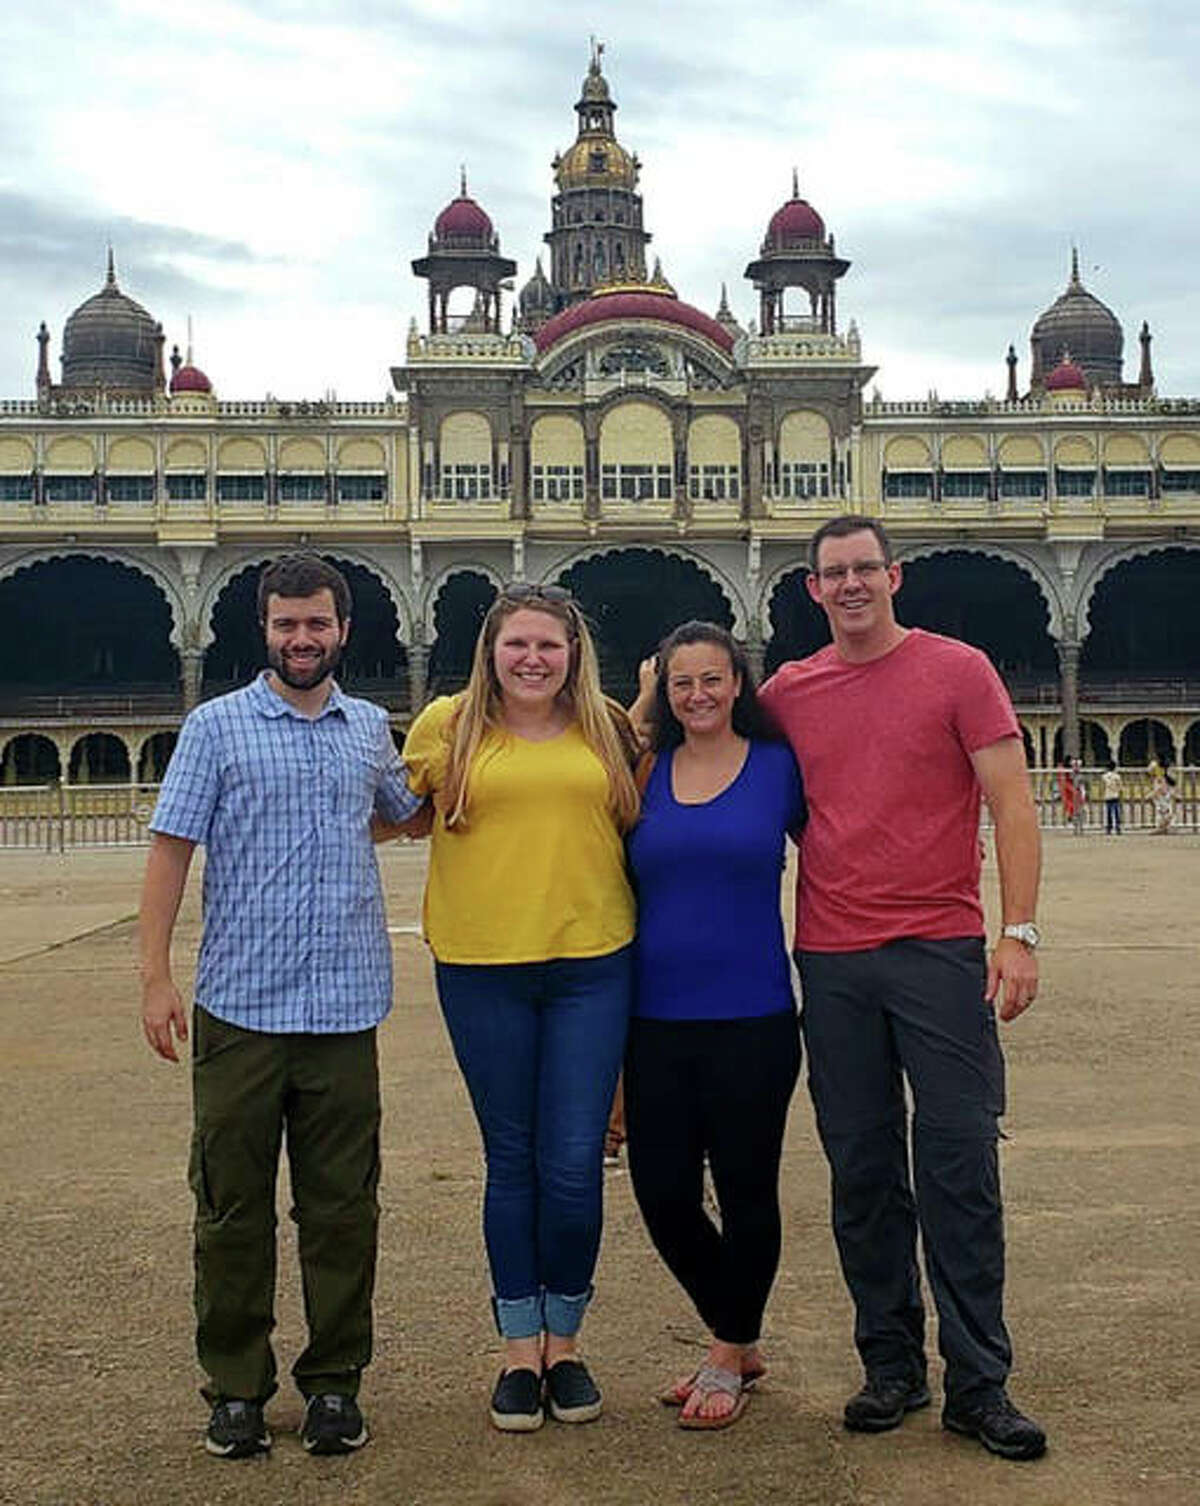 Four Southern Illinois University Edwardsville School of Pharmacy students — Caleb Braasch, Catherine Gilmore, Lauren Skarupa and James Reimer — recently returned from study in India.